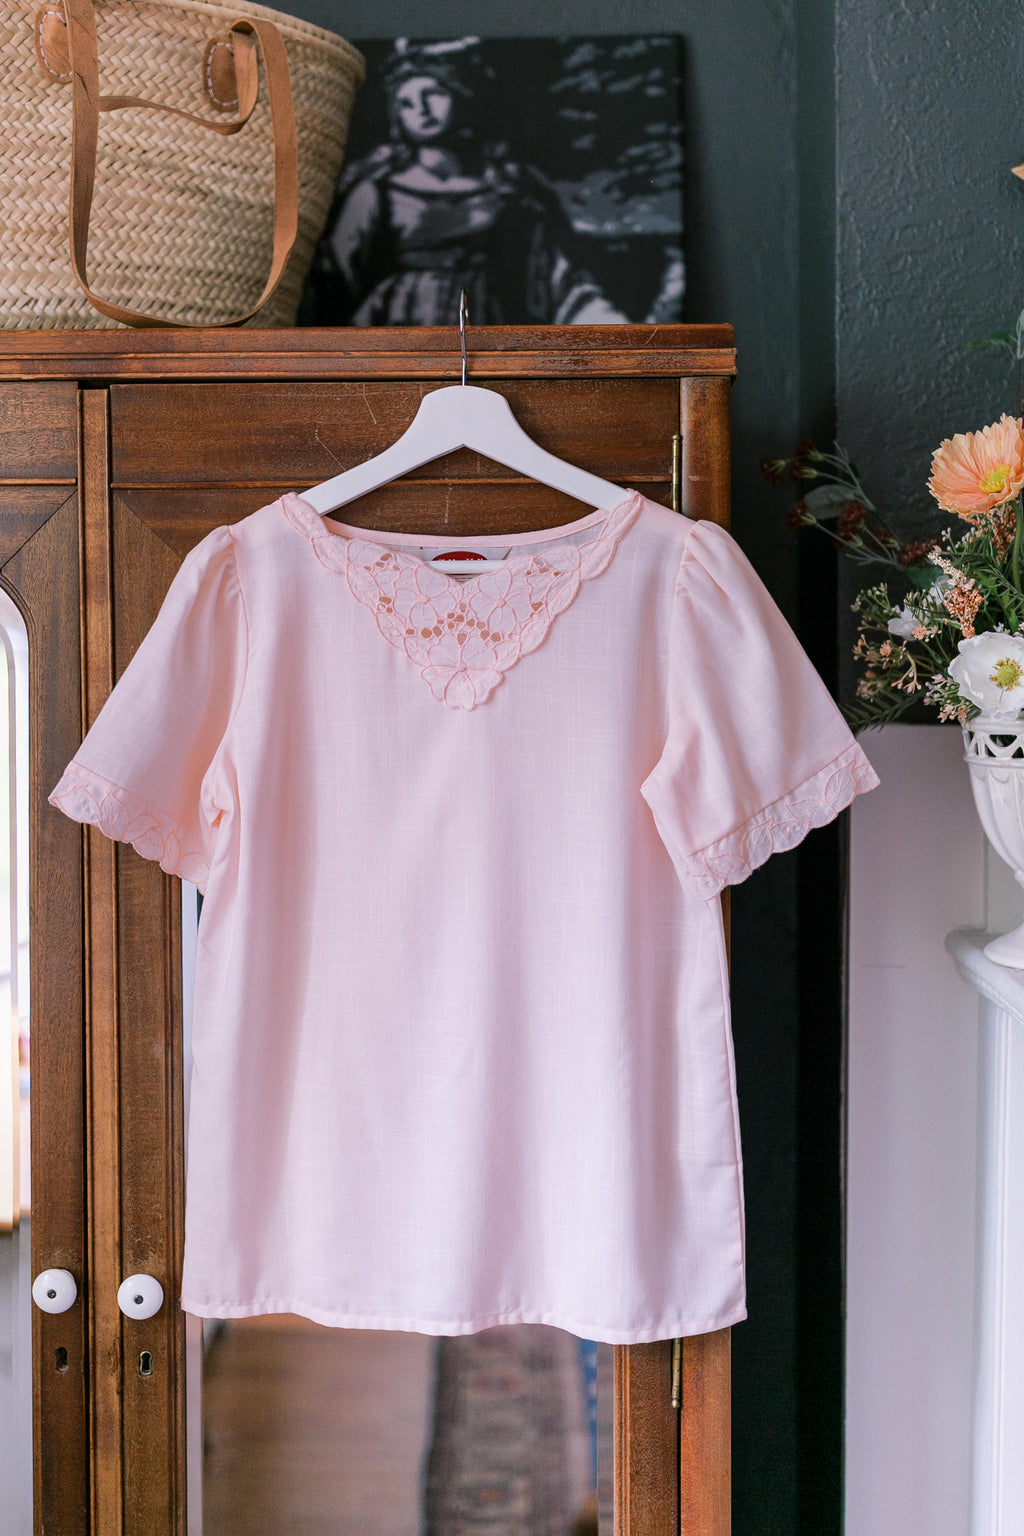 Vintage Made in USA Delicate Pink Short-Sleeve Blouse